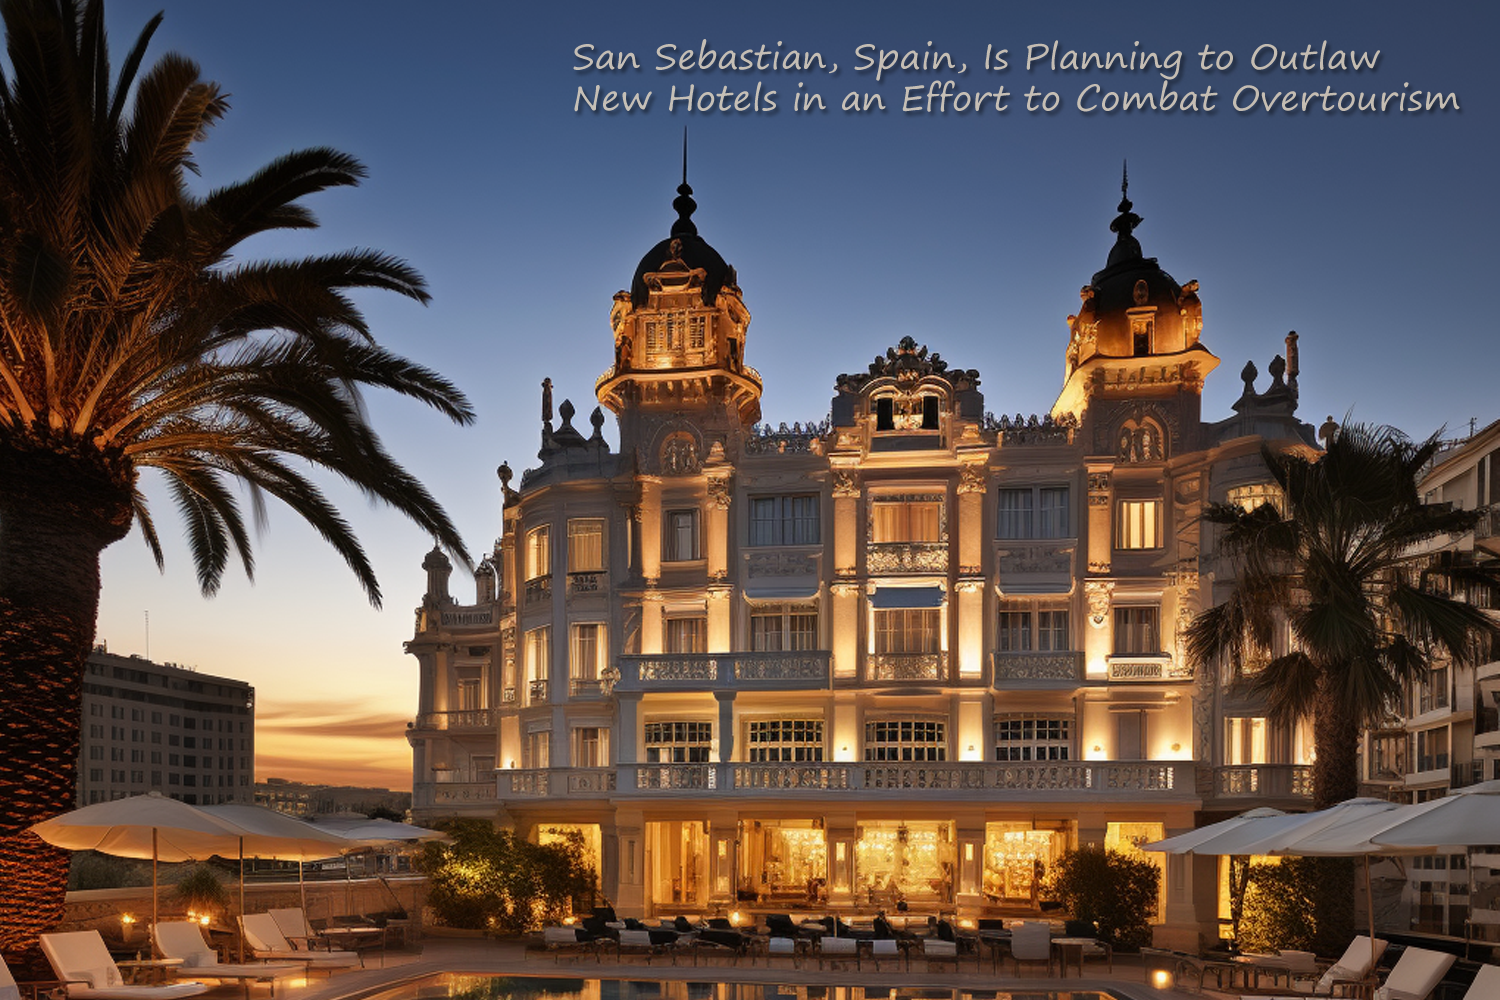 San Sebastian, Spain, Is Planning to Outlaw New Hotels in an Effort to Combat Overtourism.